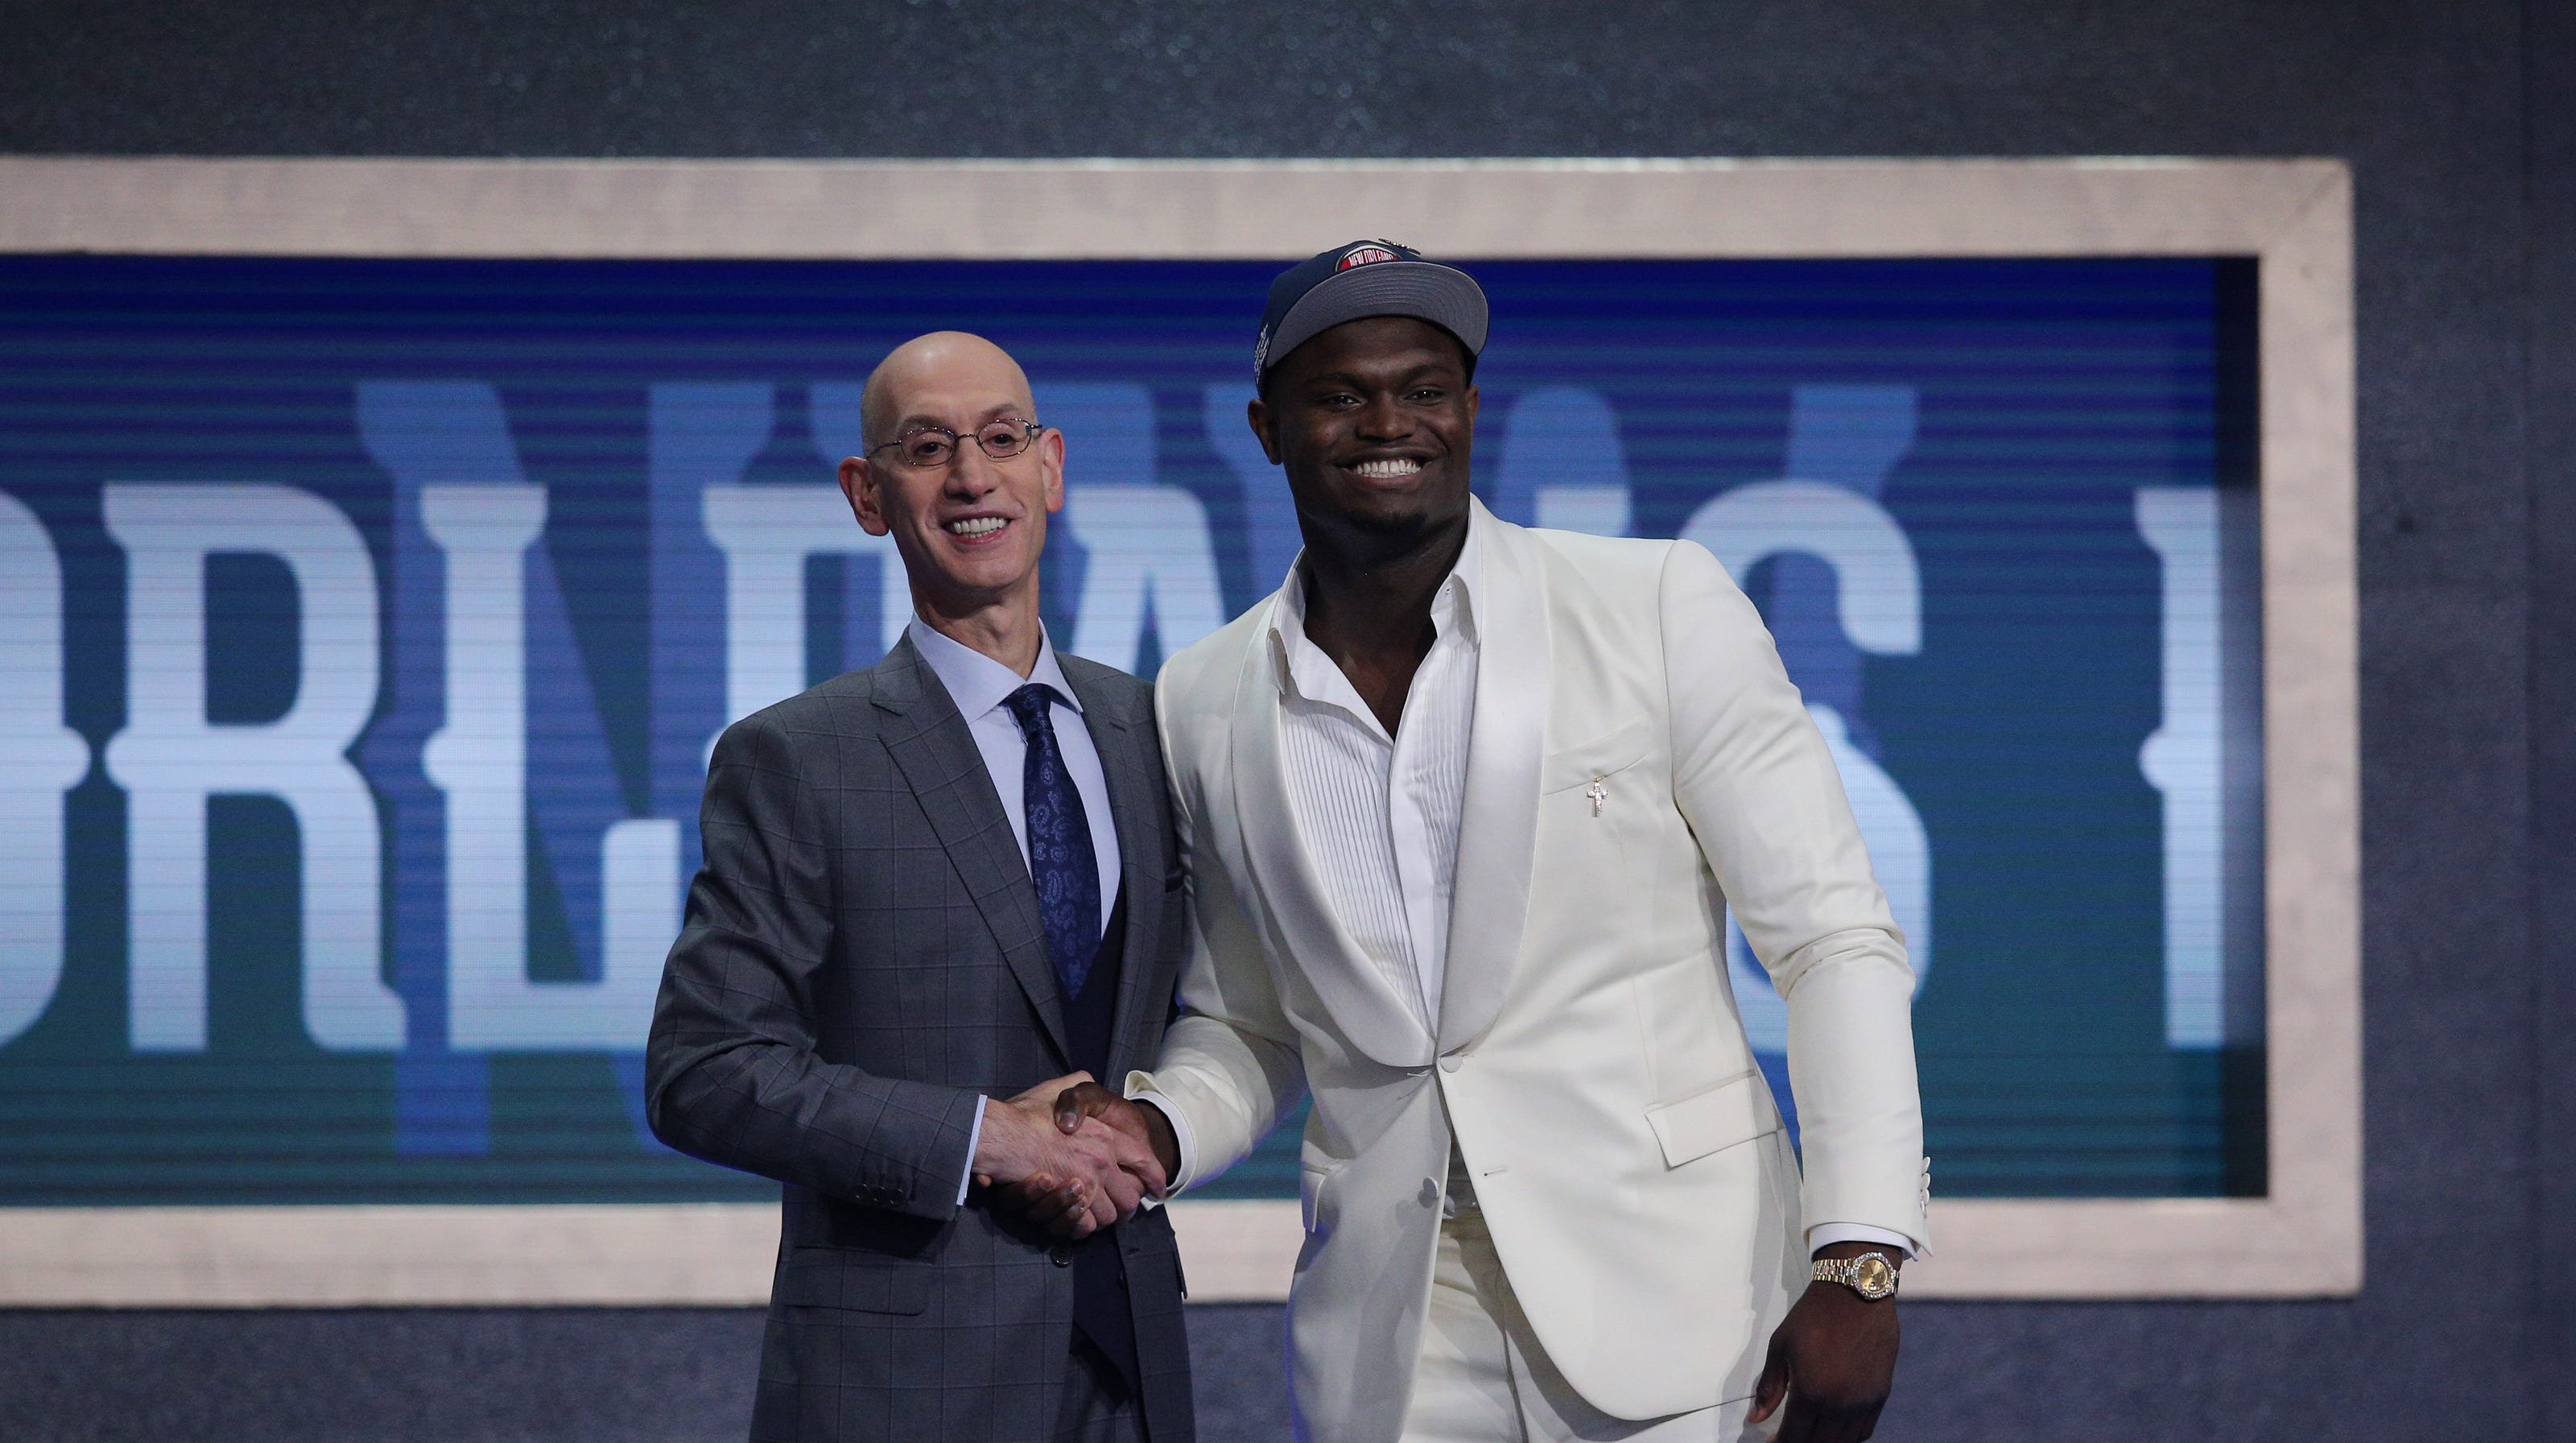 NBA draft New Orleans Pelicans draft Zion Williamson with No. 1 pick